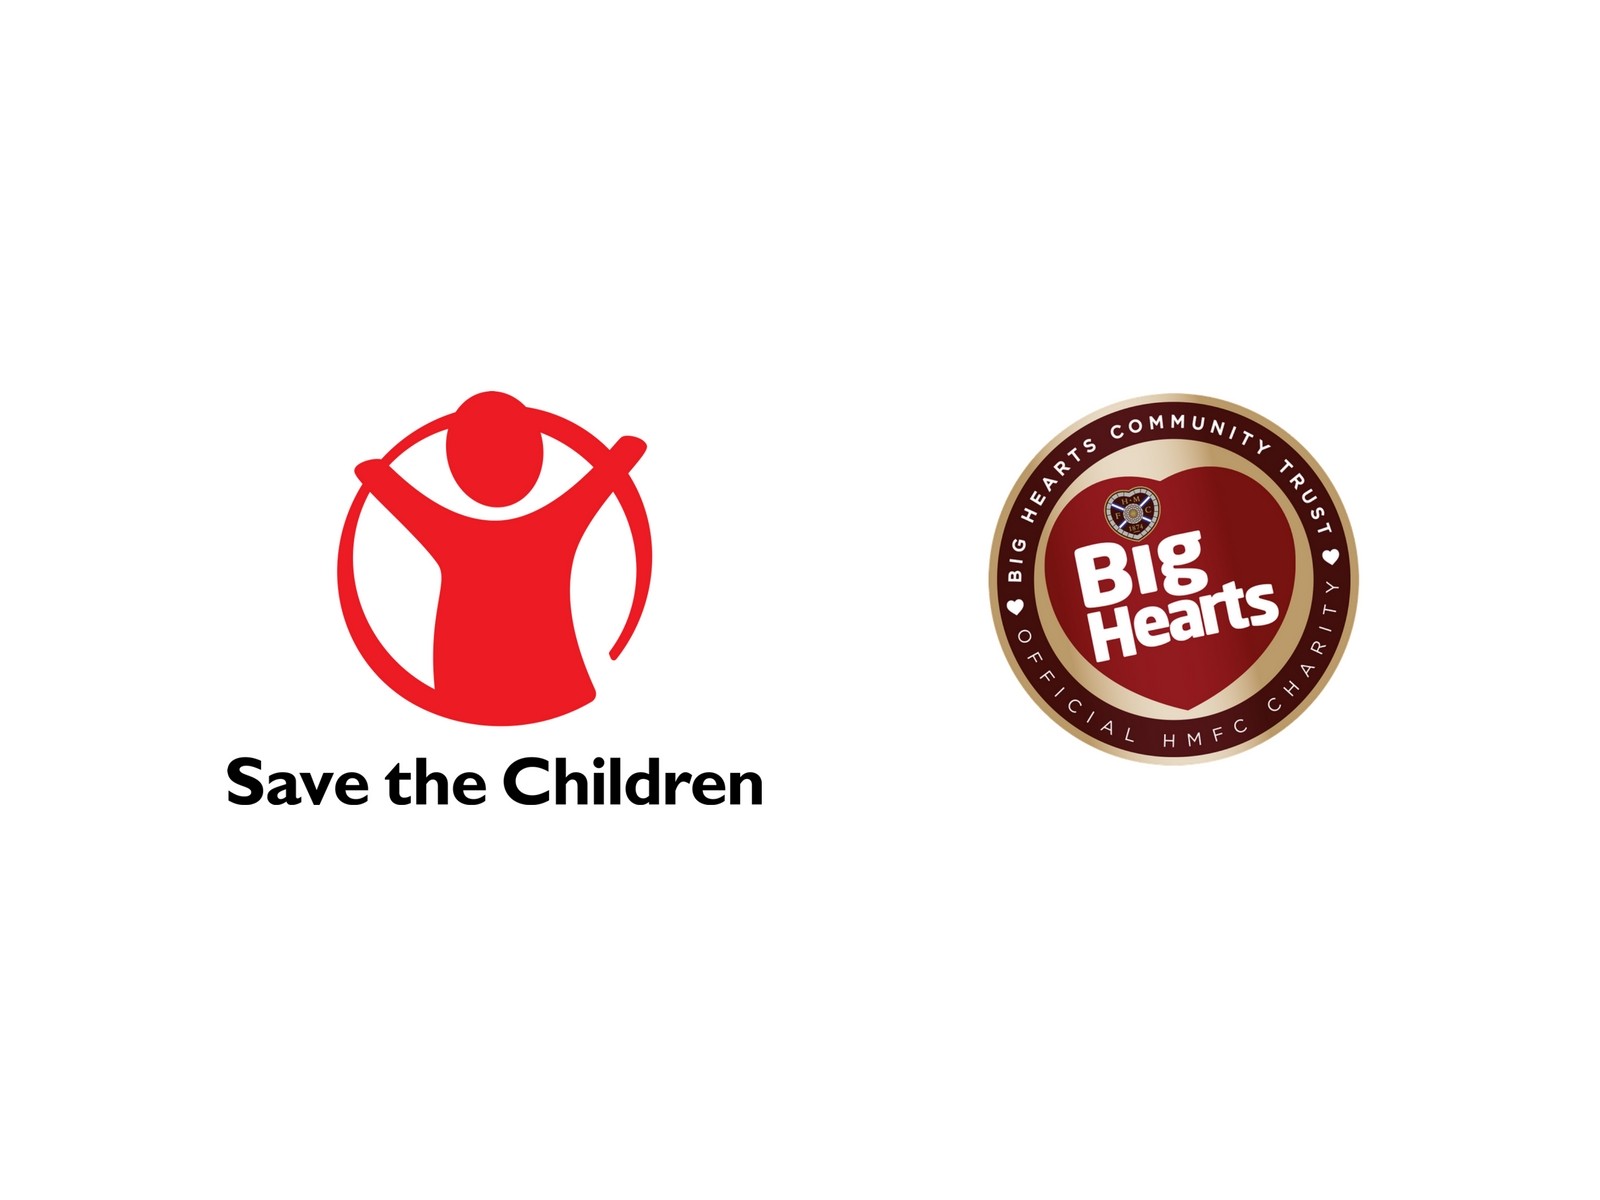  » Run with Big Hearts & Save the Children